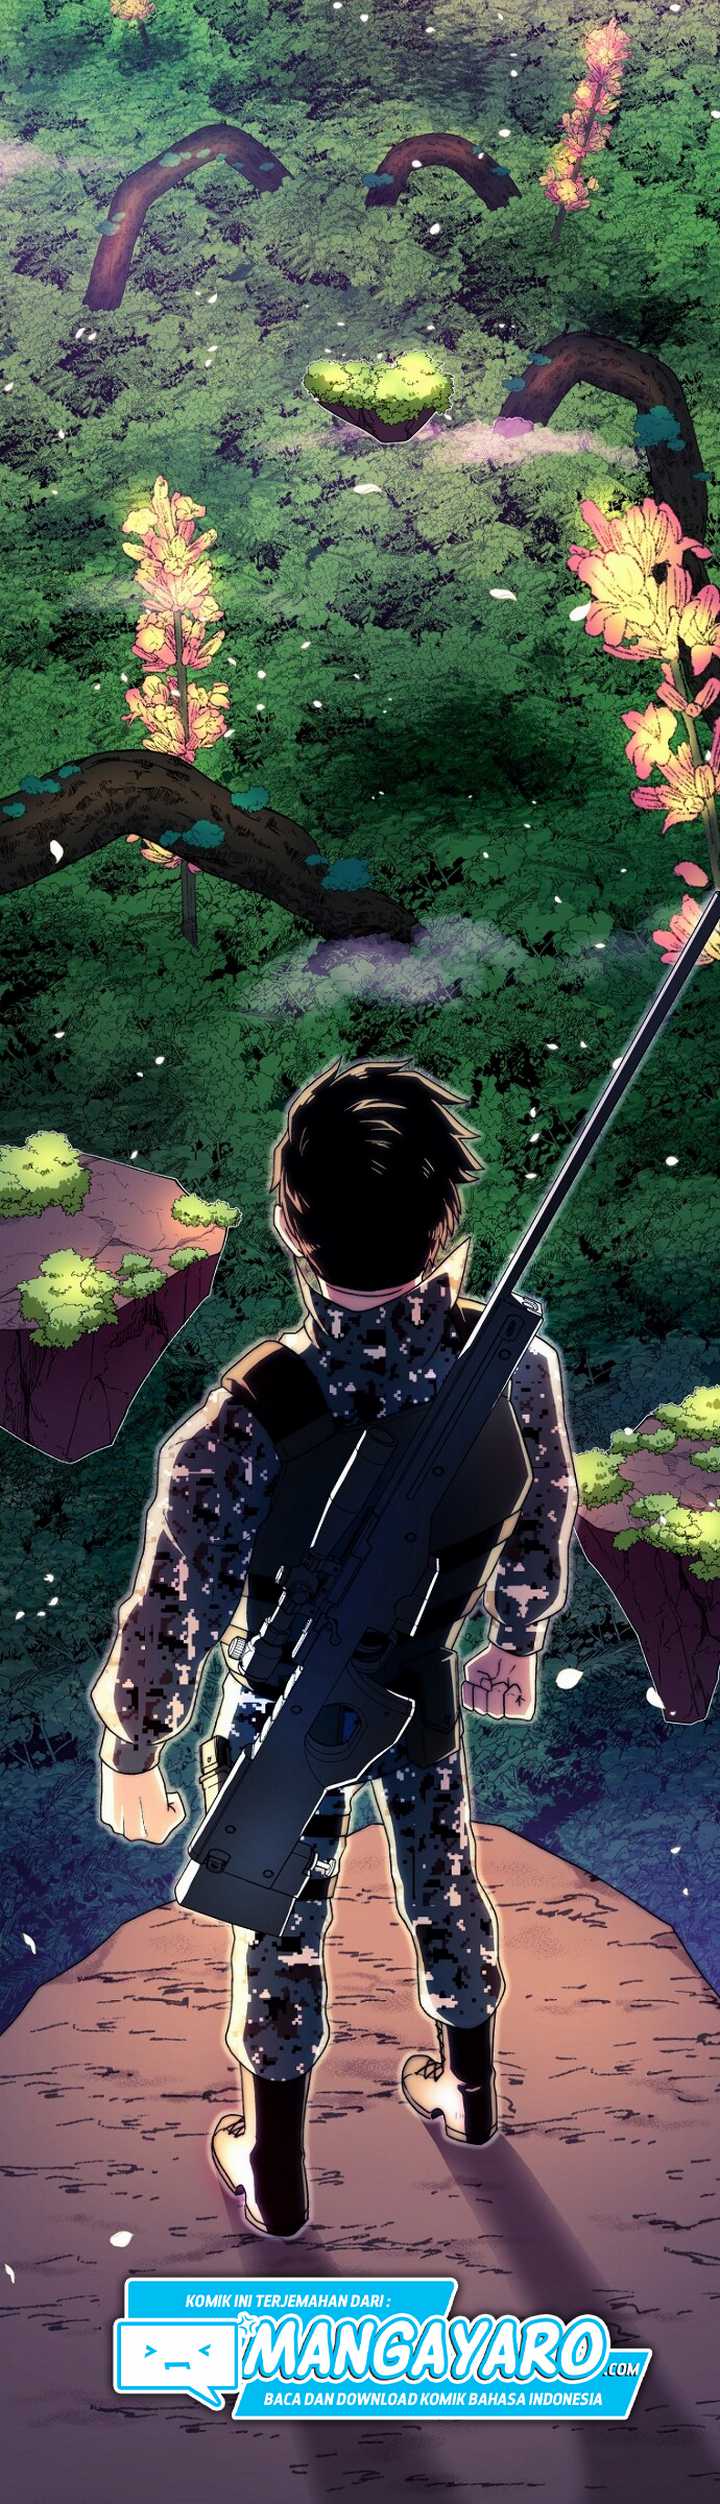 Magical Shooting: Sniper of Steel Chapter 00